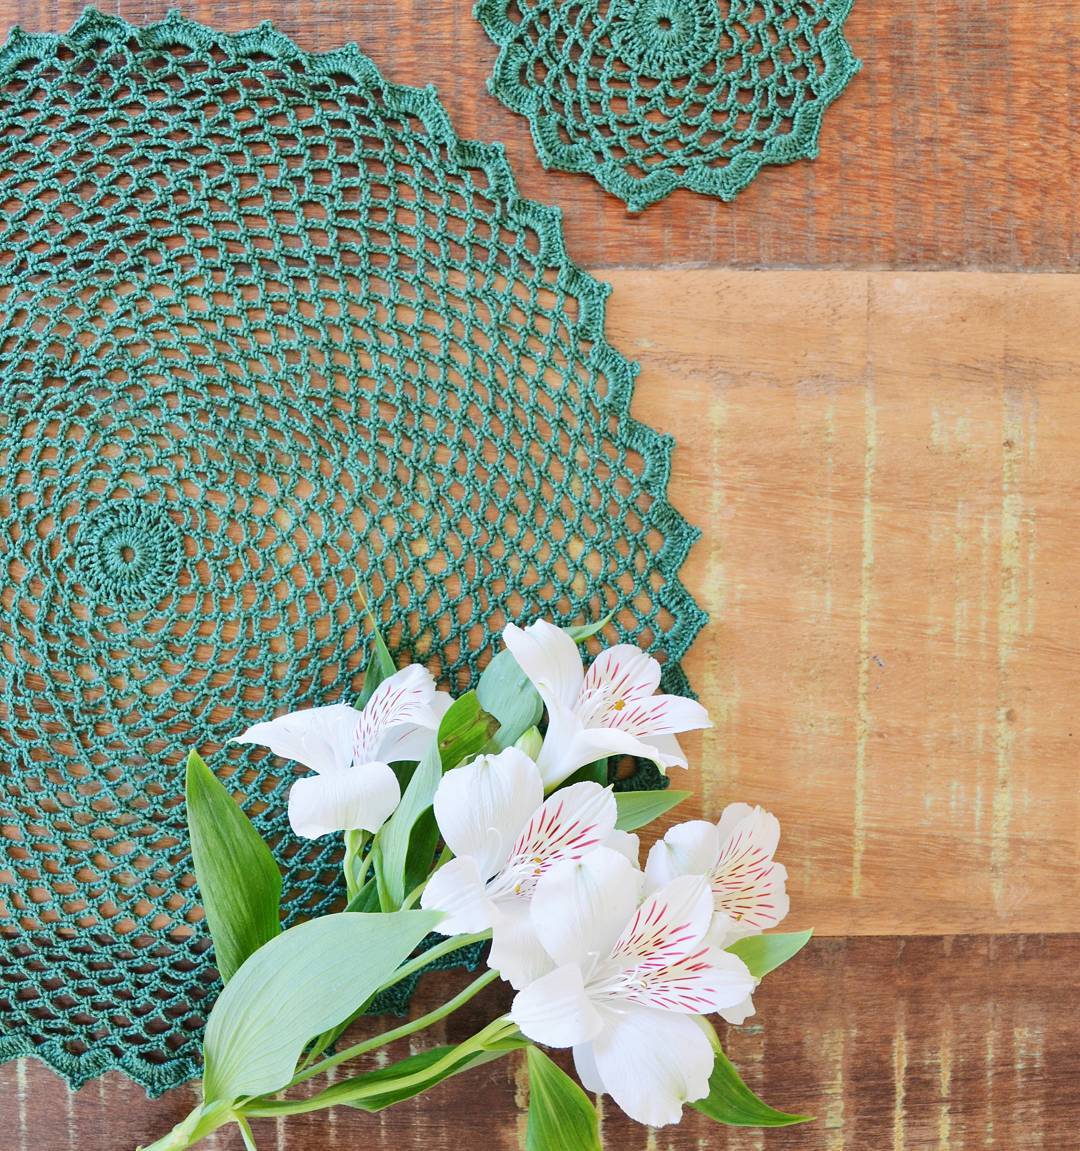 A crochet sousplat with a delicate touch for the table.